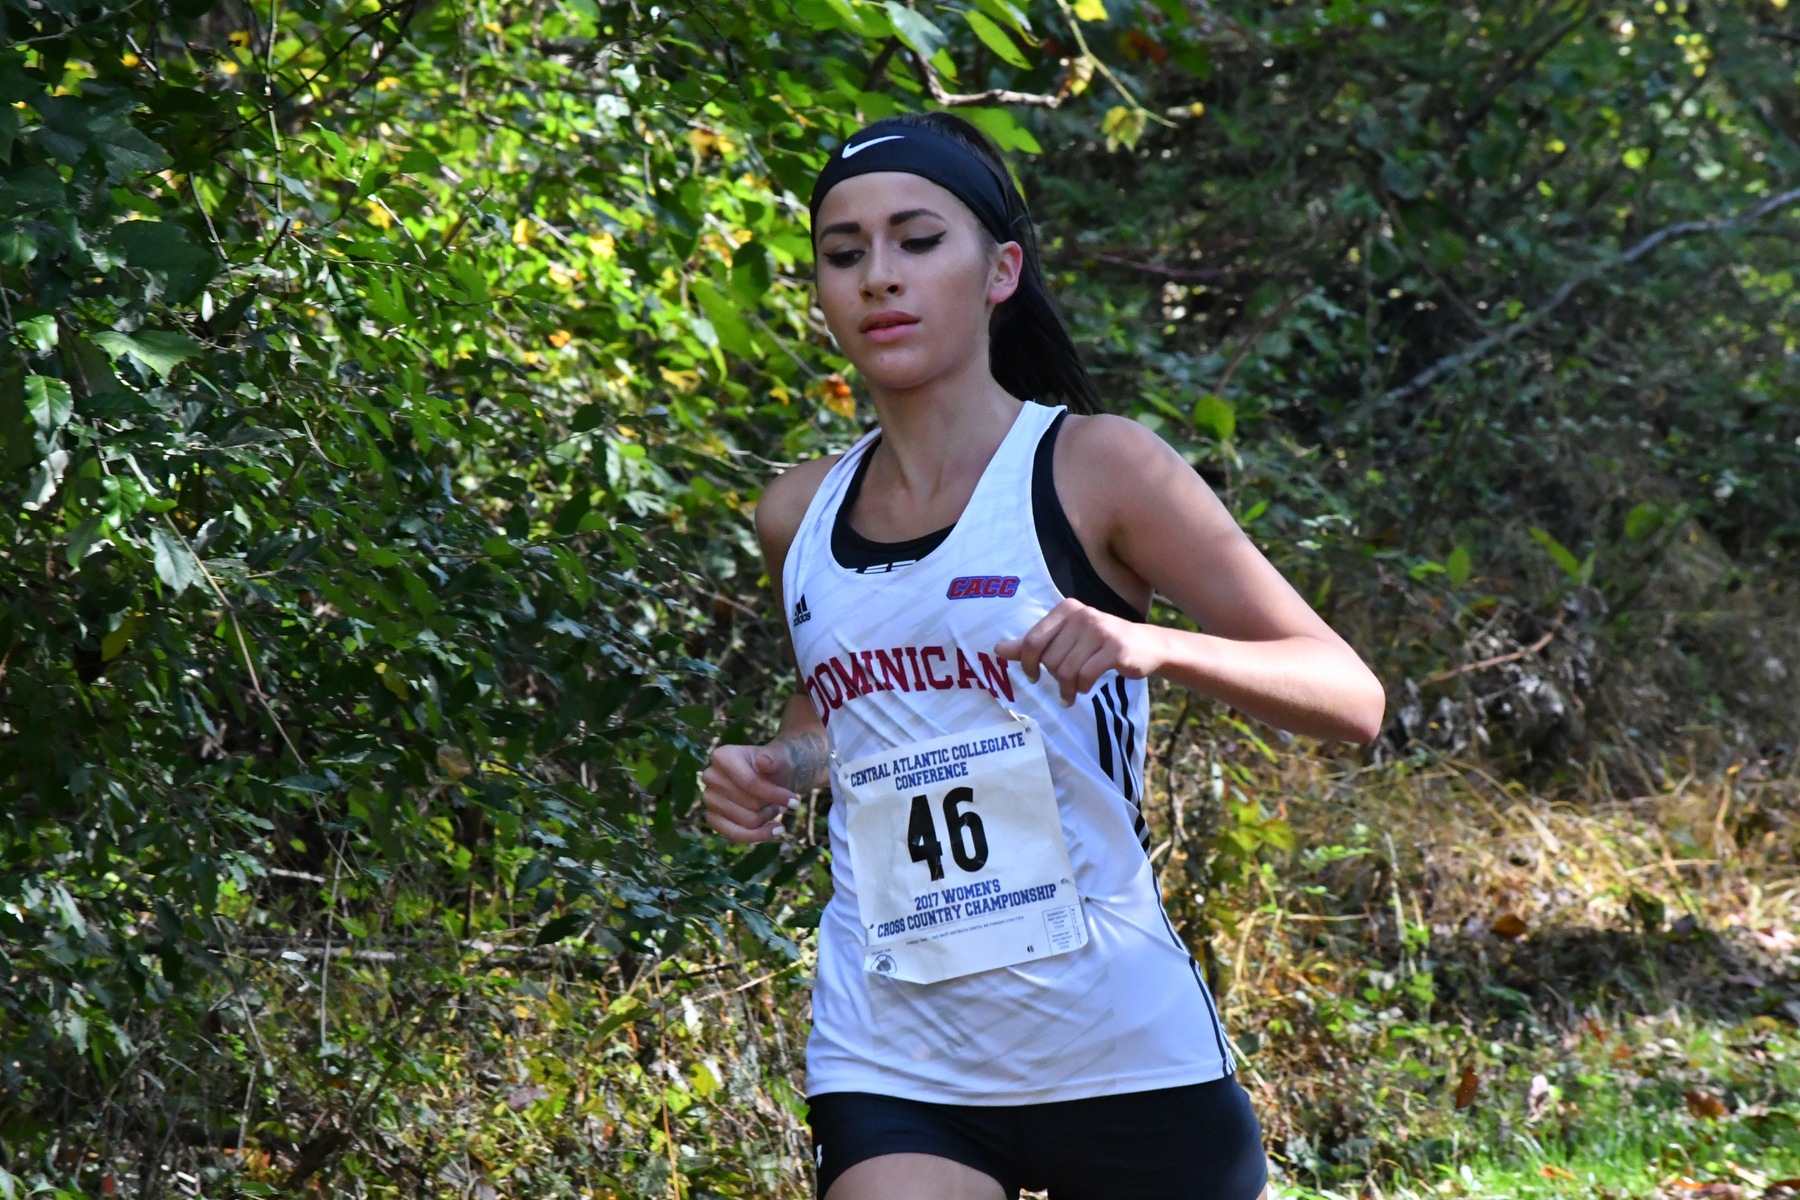 WOMEN'S CROSS COUNTRY FINISH 11TH AT HIGHLANDER XC CHALLENGE